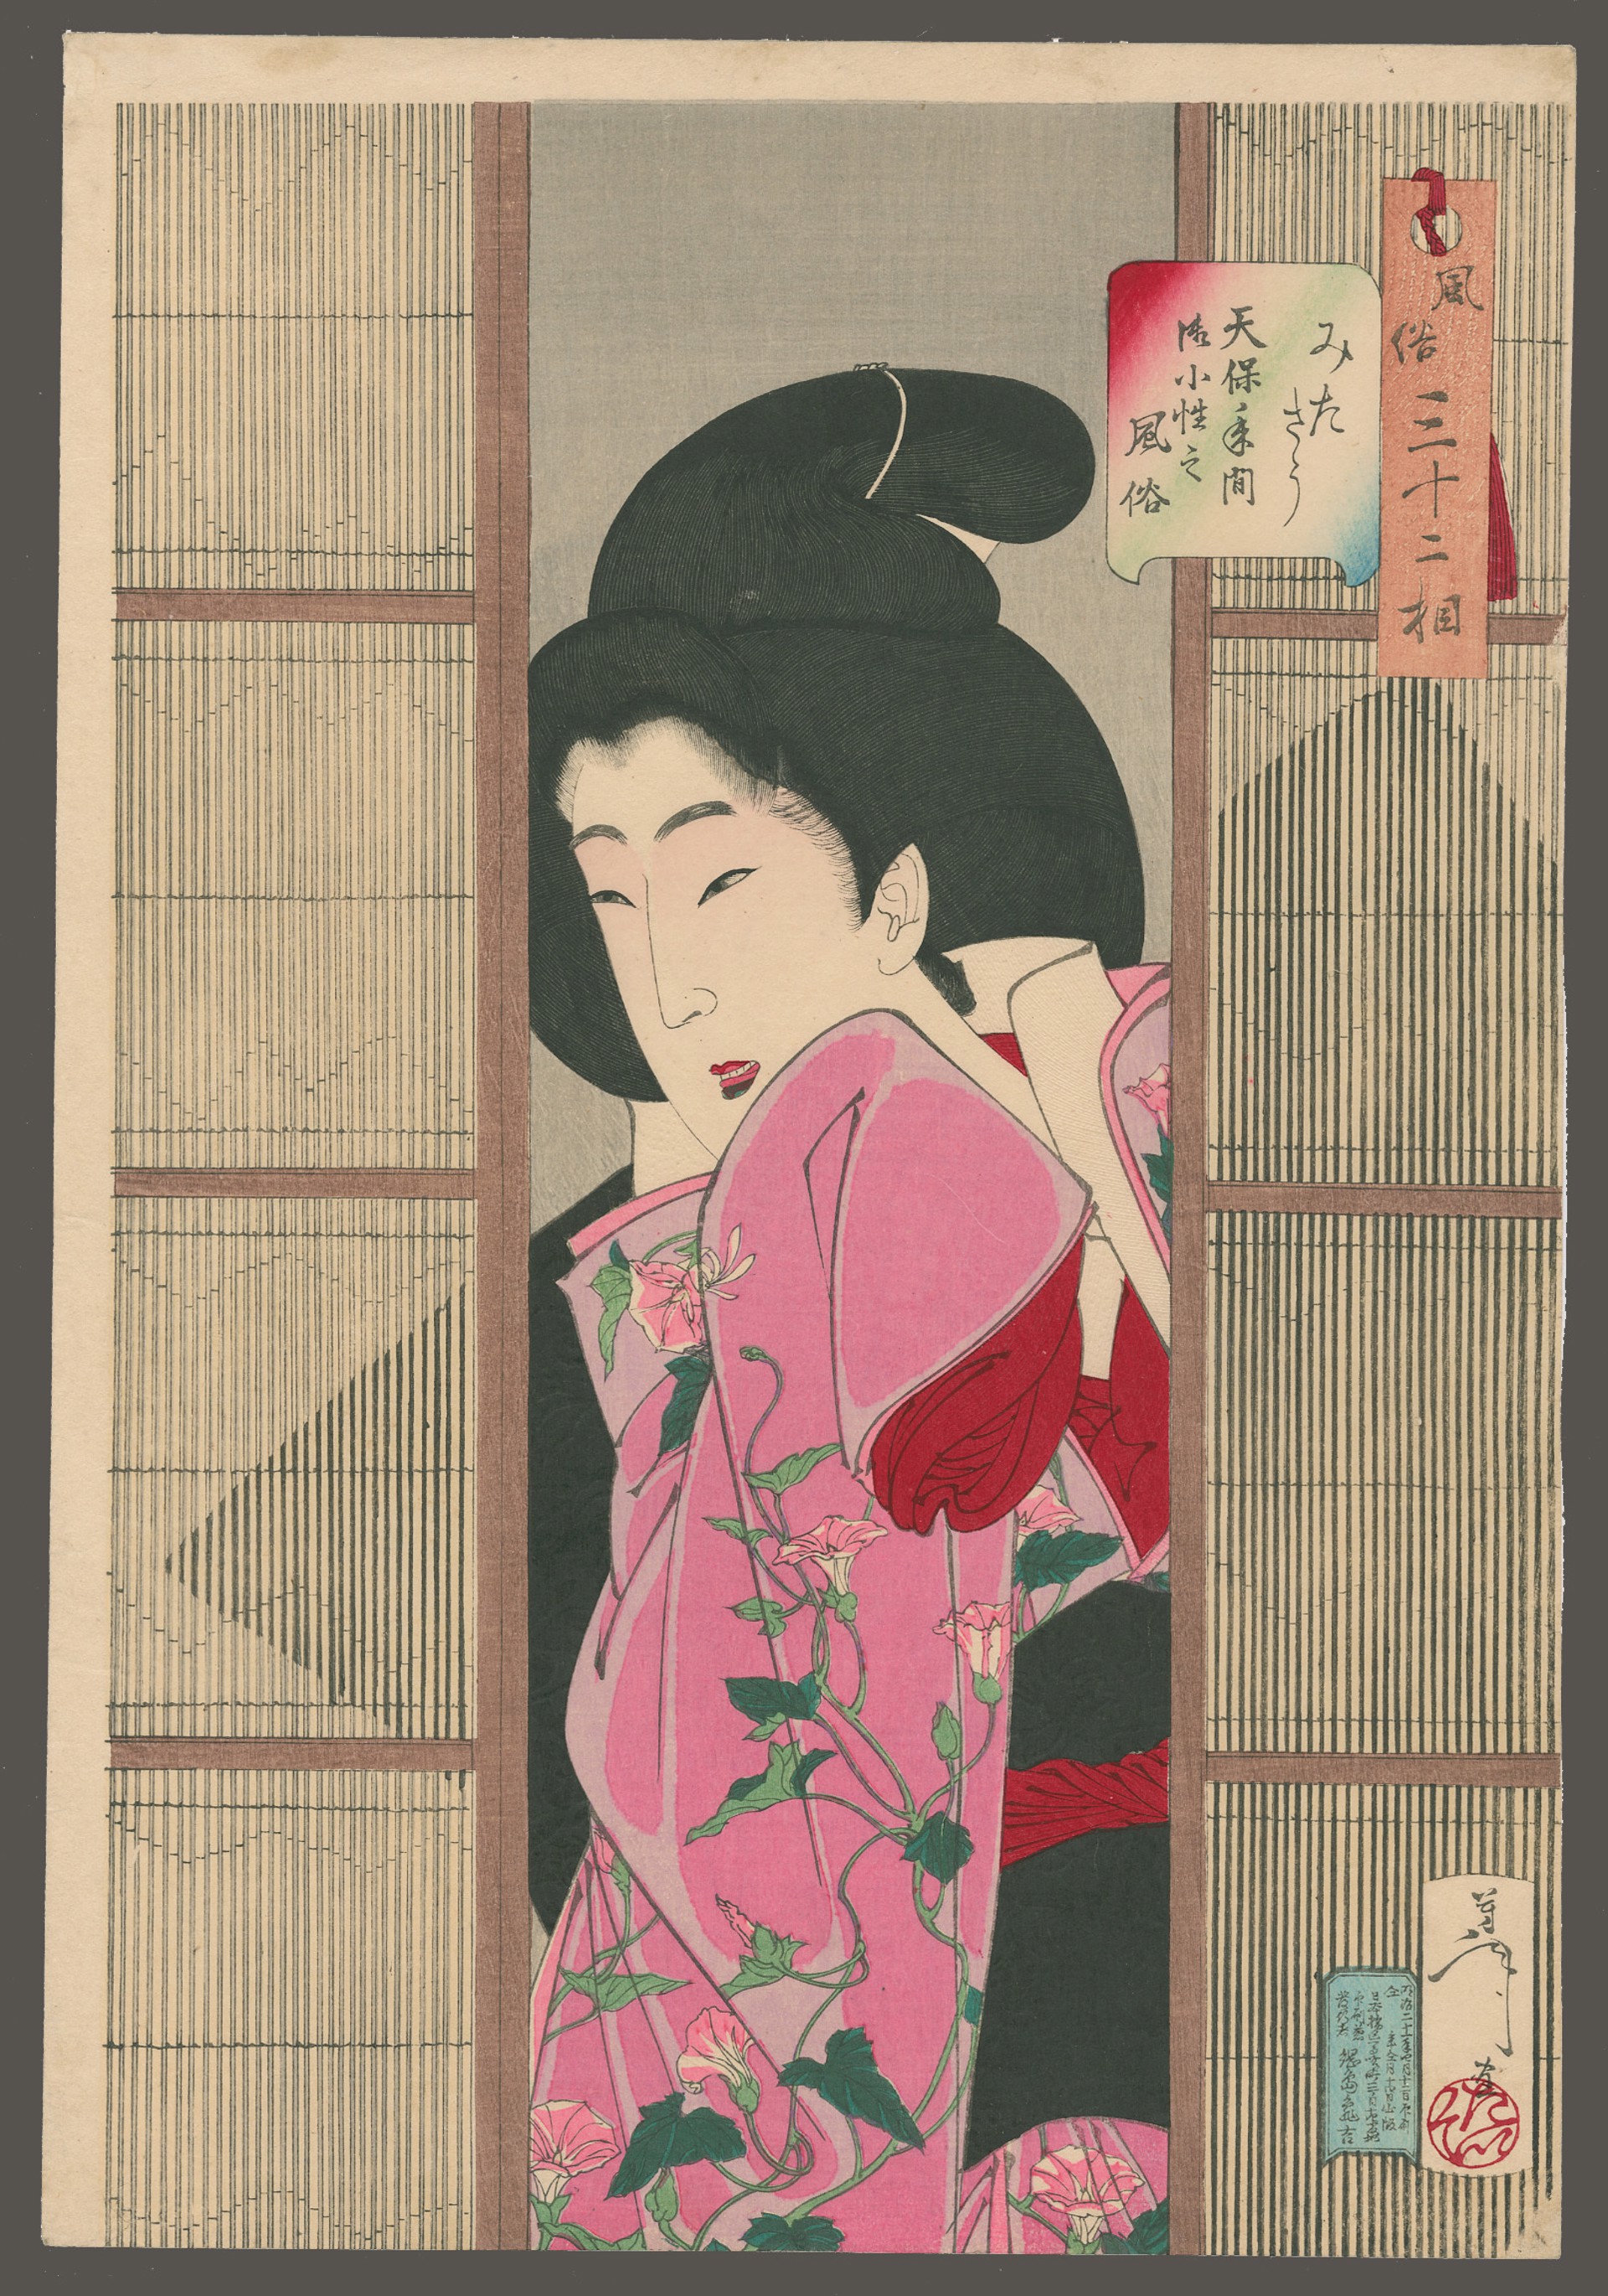 Looking Inquisitive: A Maid in the Tempo Era(1830-44) 32 Aspects of Women by Yoshitoshi